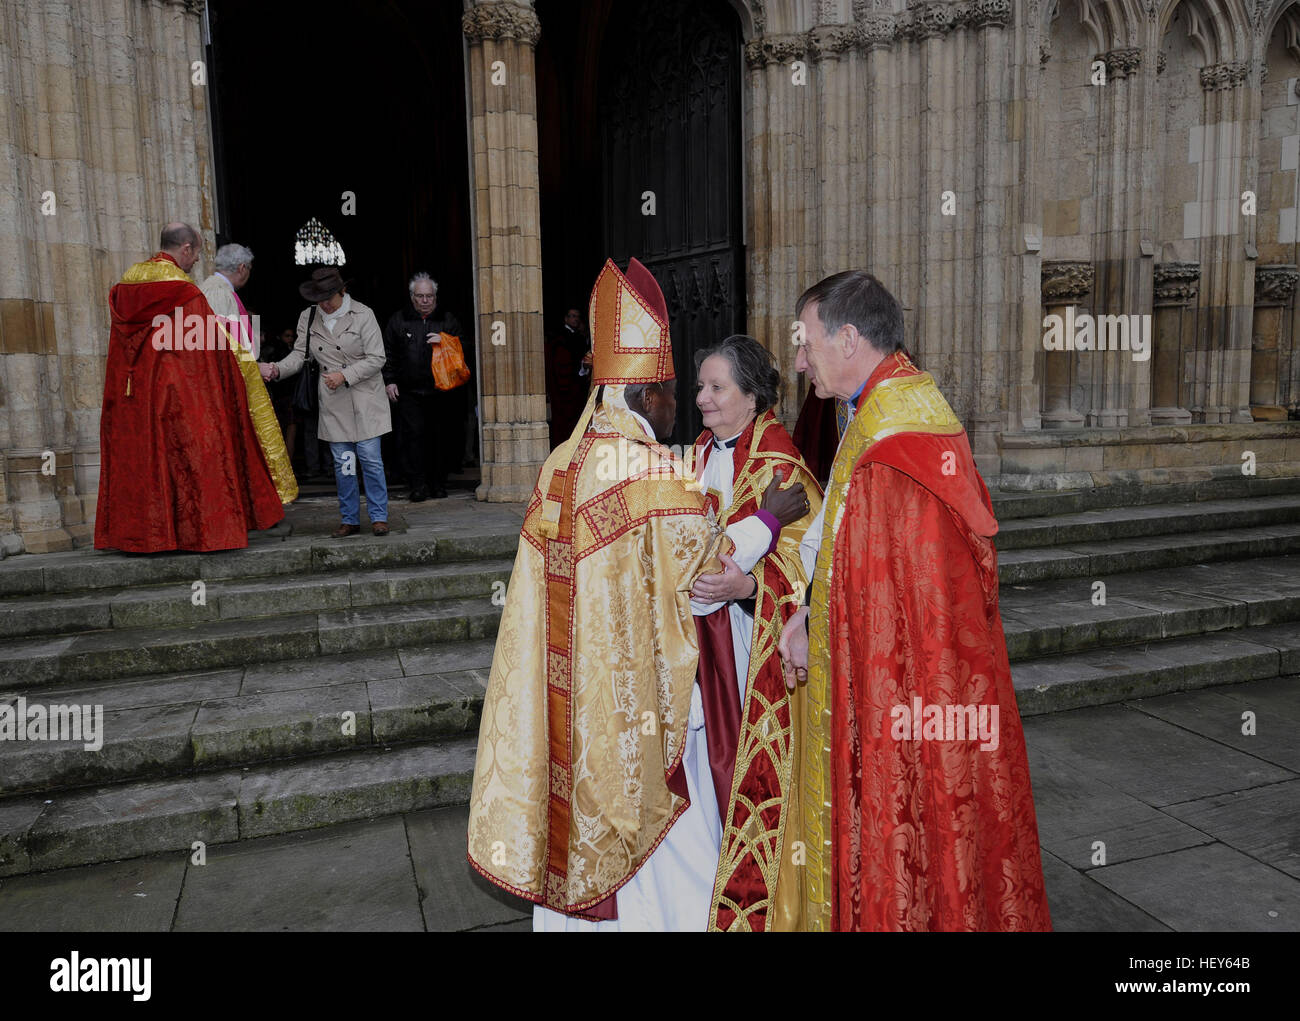 The Dean of York Minster Vivienne Faull talks to the Archbishop of York Dr John Sentamu (left) as they leave York Minster following the Christmas Day Service where the bells remained silent for the first time in over 650 years following the sacking of the bell ringers. Stock Photo